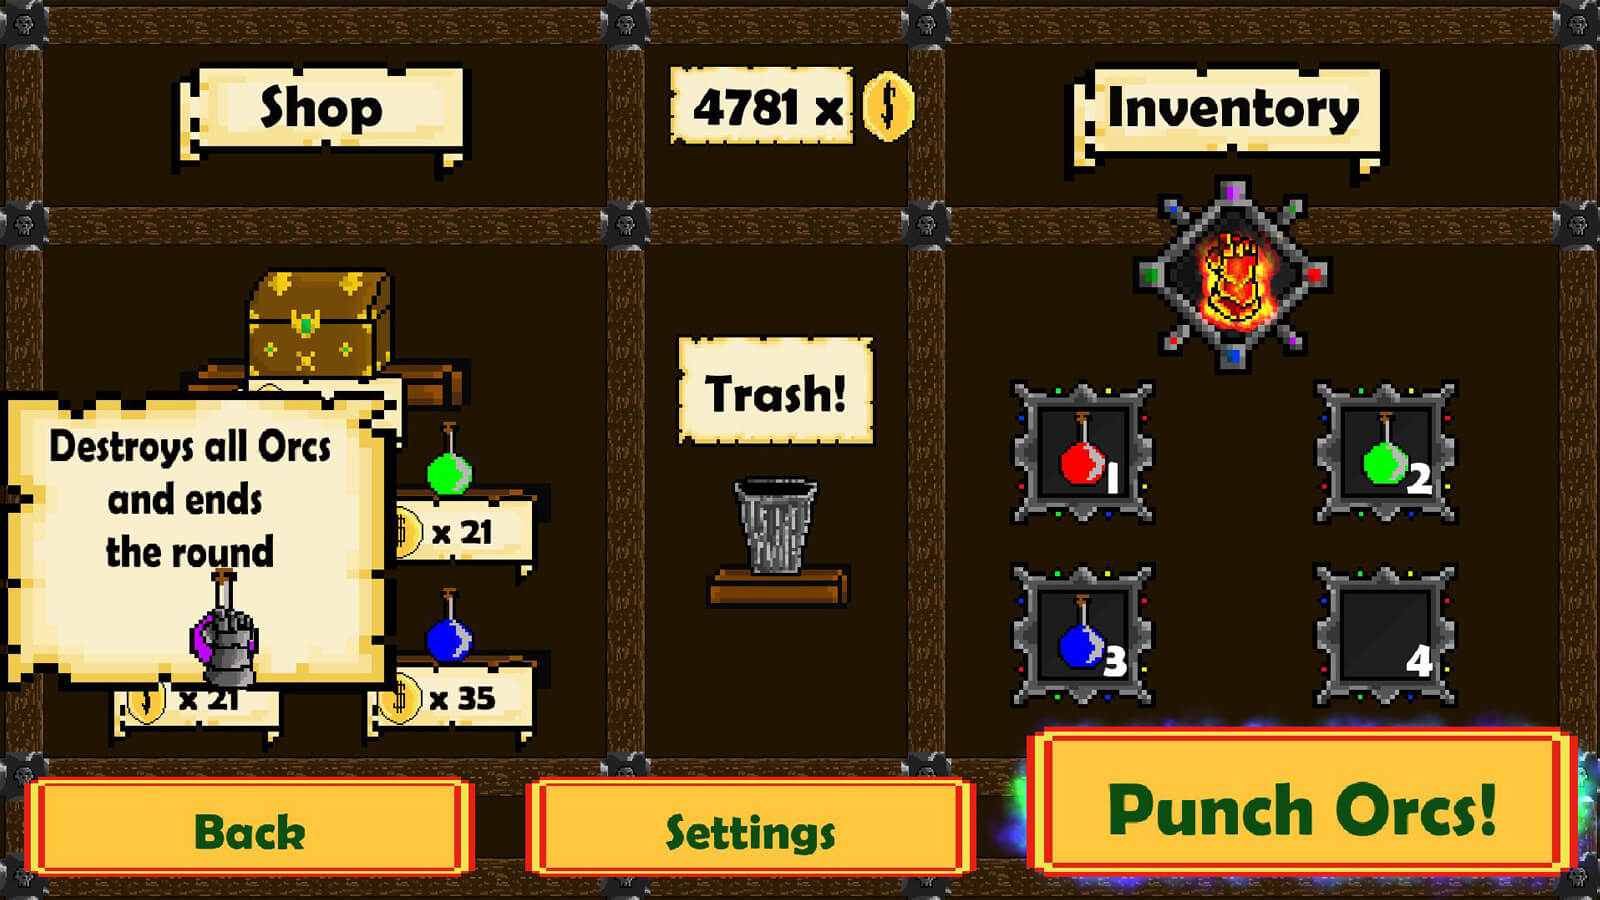 A shop menu where the player can purchase items.